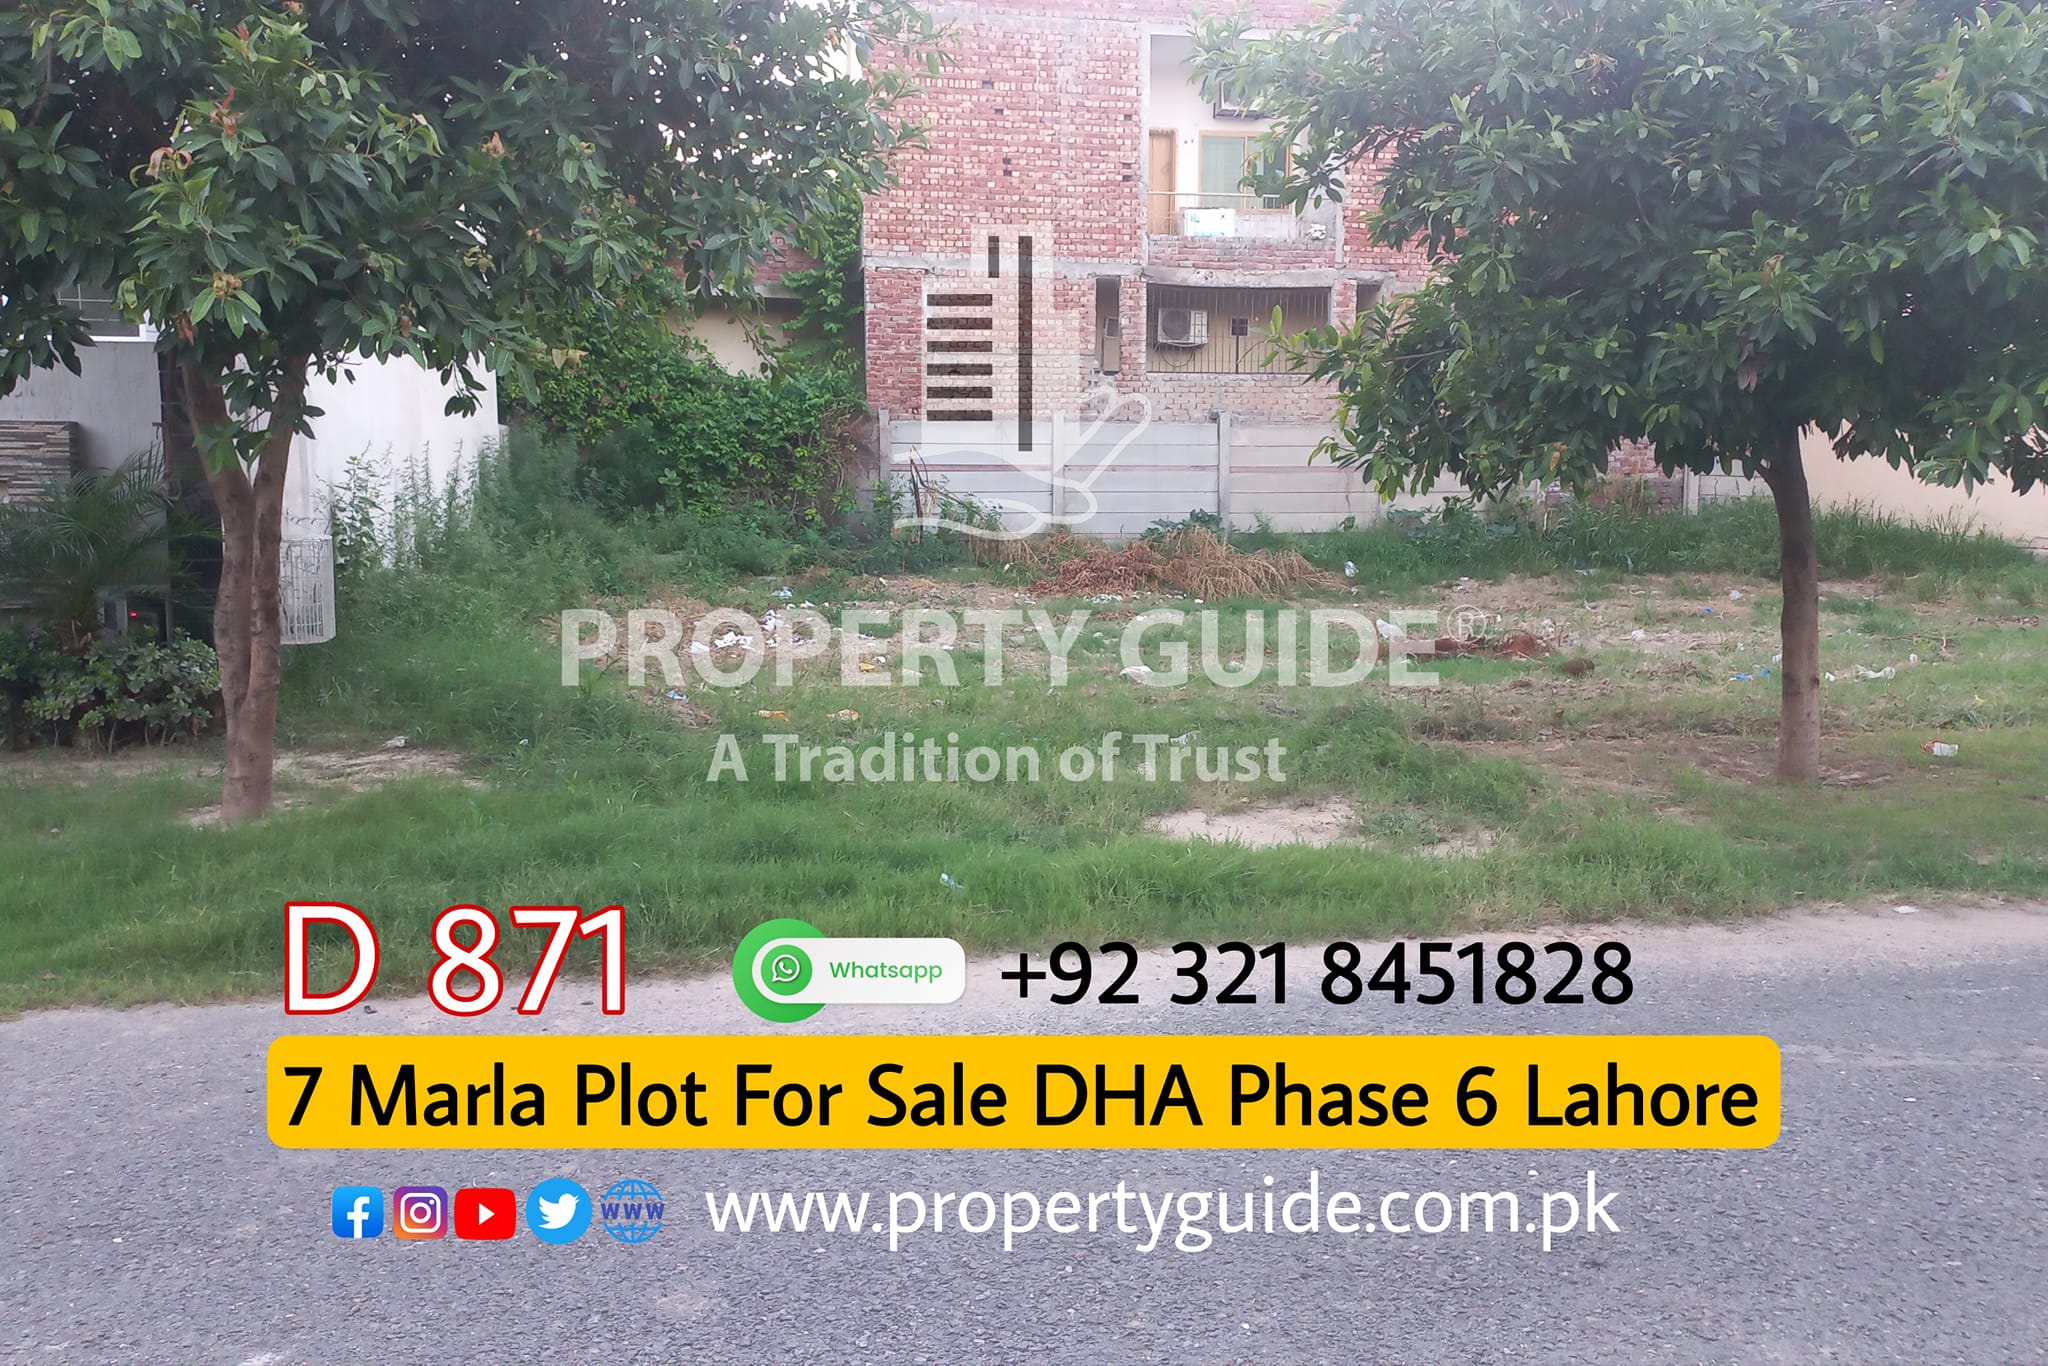 07 Marla Plot For Sale In DHA Phase 6 Lahore – Property Guide